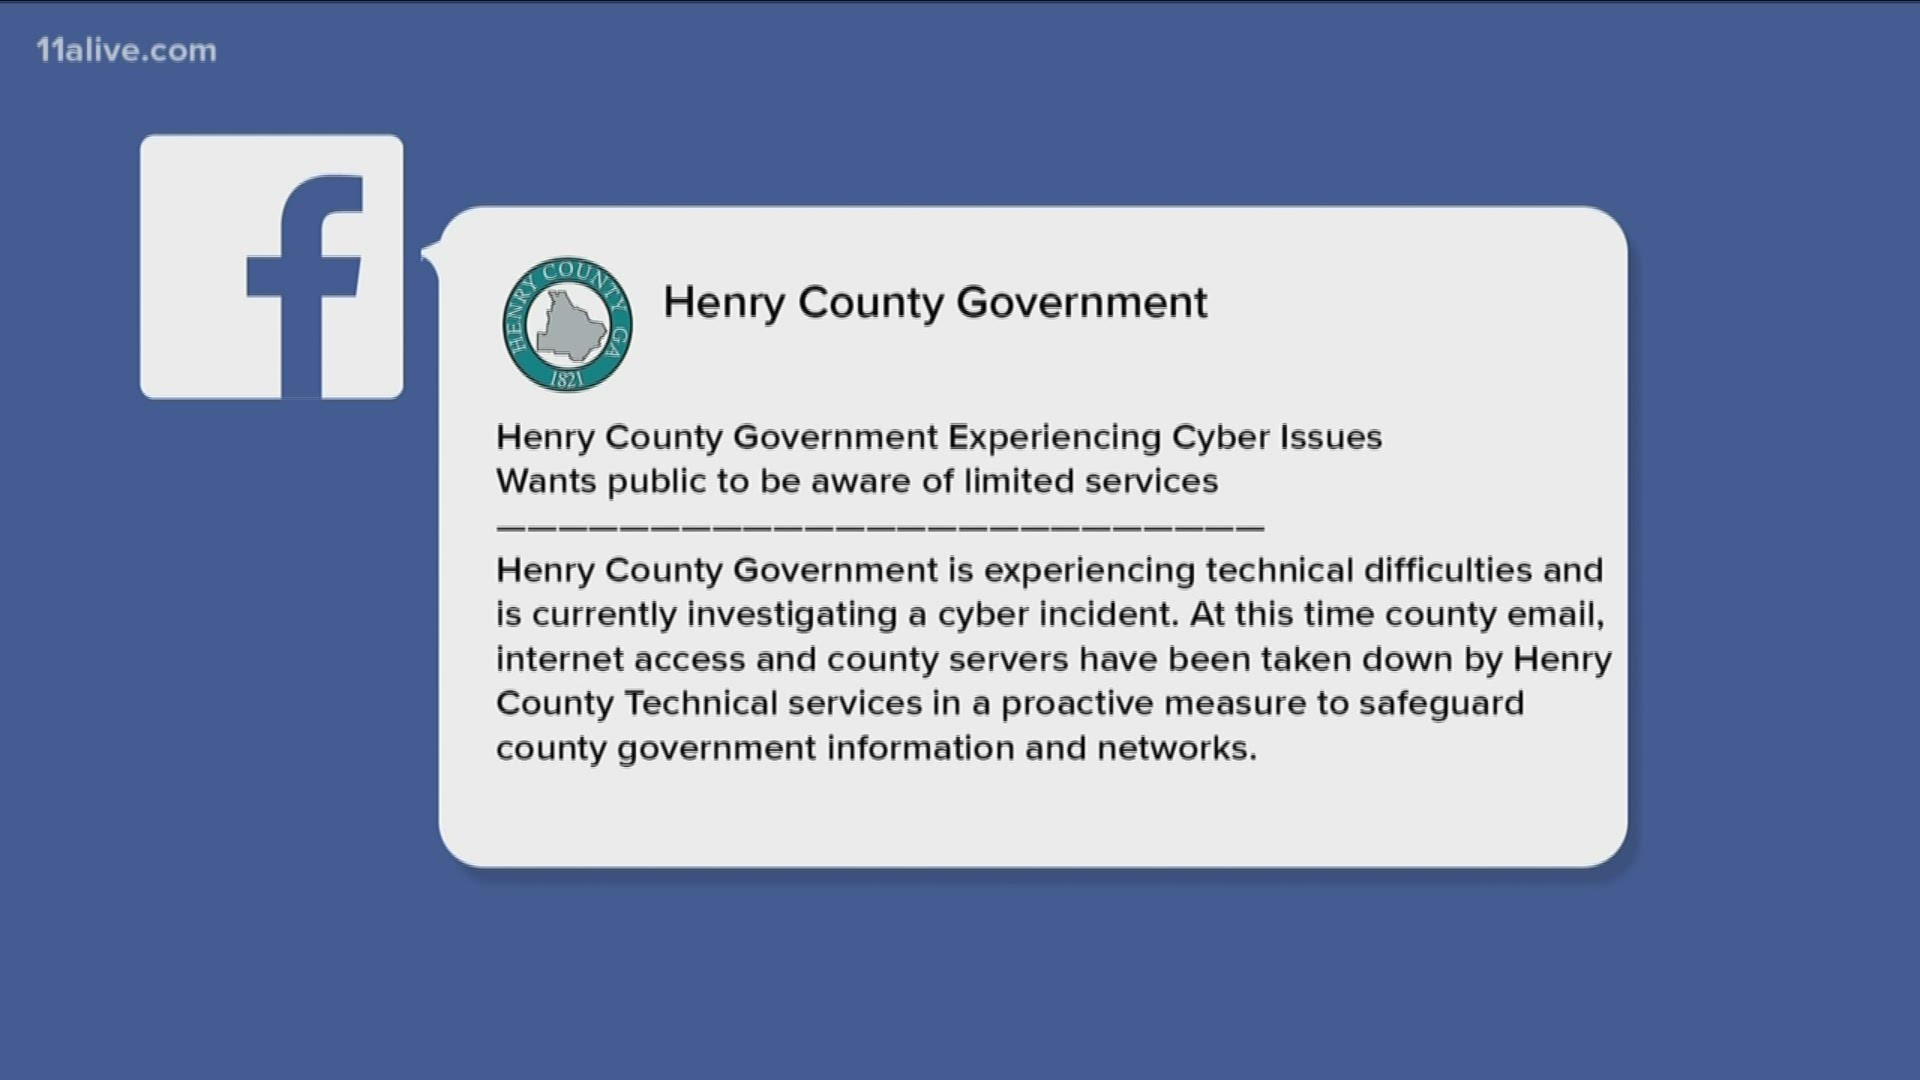 Henry County has become the latest municipality to experience "cyber" issues that have left several services unusable. Now, the FBI is investigating.